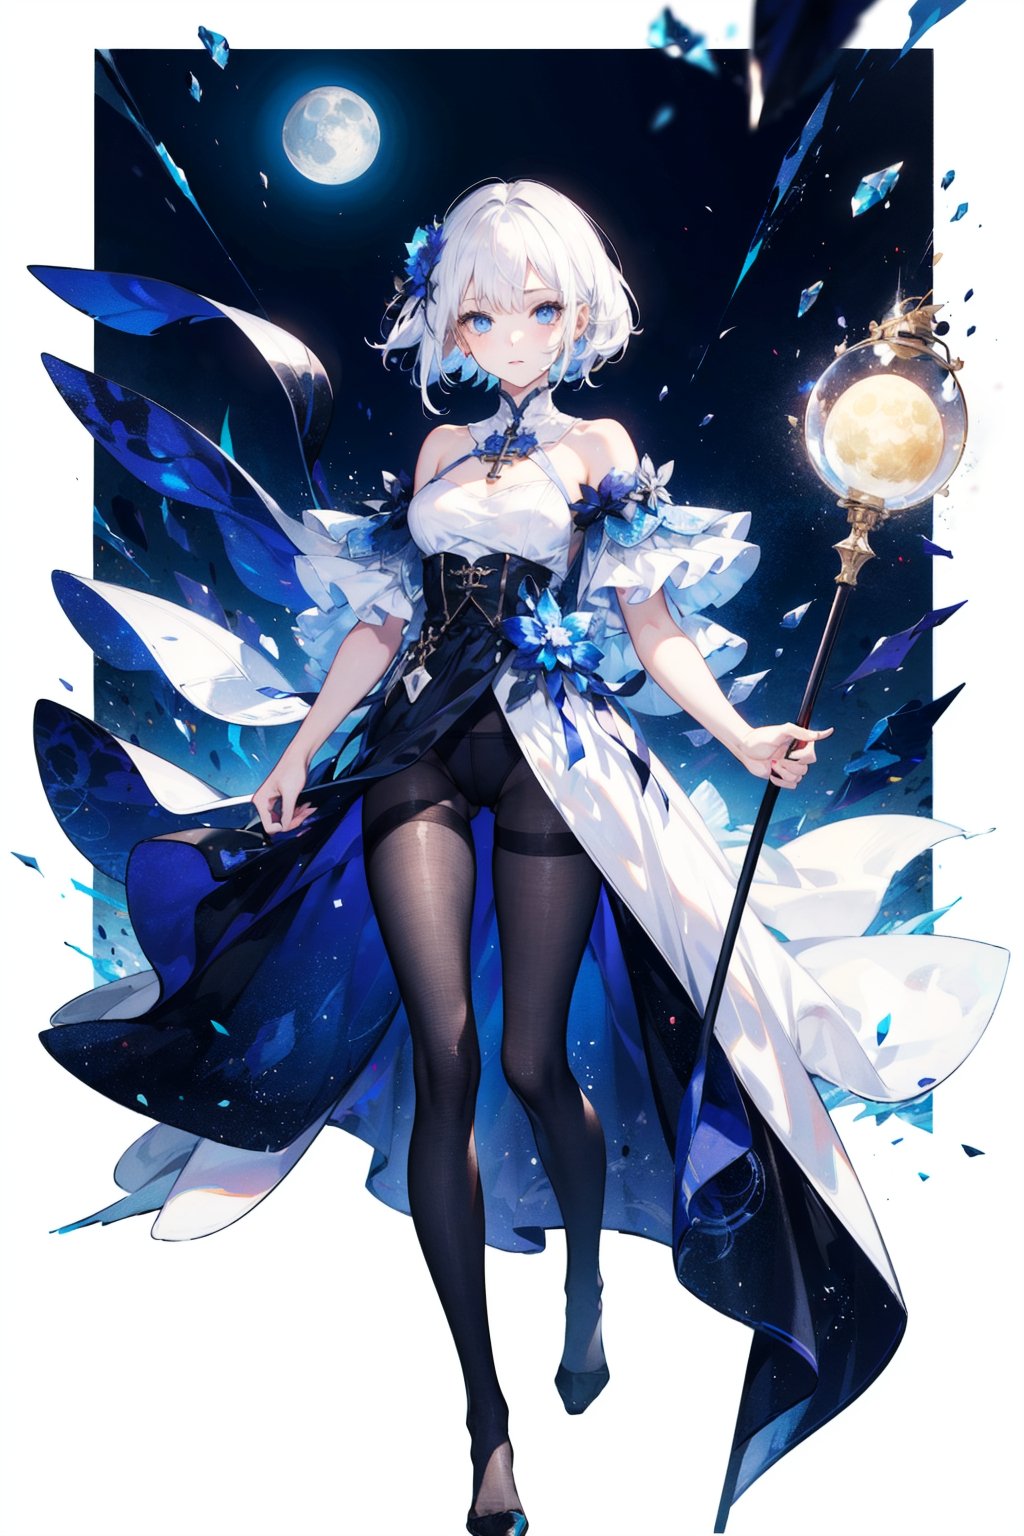 1 girl,starry sky,(White with luster (transparency:1.4) Crotchless pantyhose),moon,Picturesque aesthetic style,Blurred foreground,spark,white hair,blue eyes,no shoes,cross_leg,